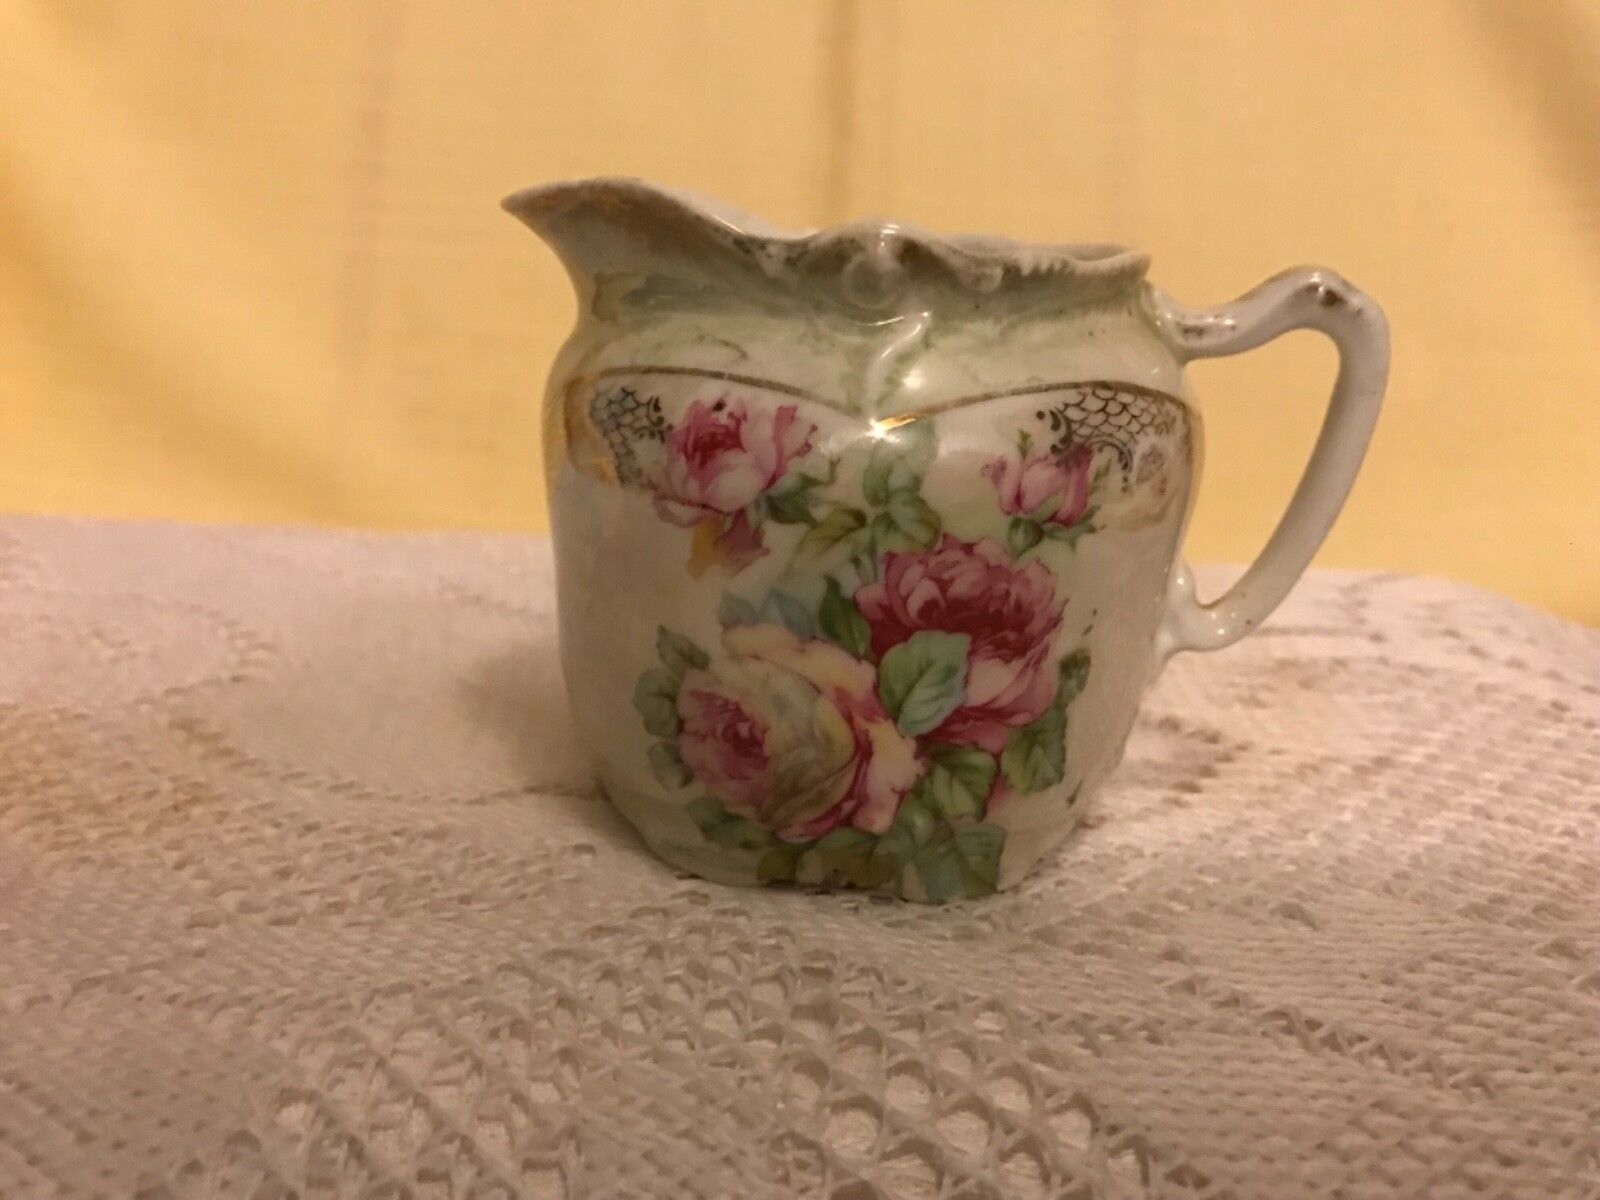 ANTIQUE WHEELOCK GERMANY LA PERL ROSE CREAMER - LUSTER WARE - BOUQUET OF ROSES